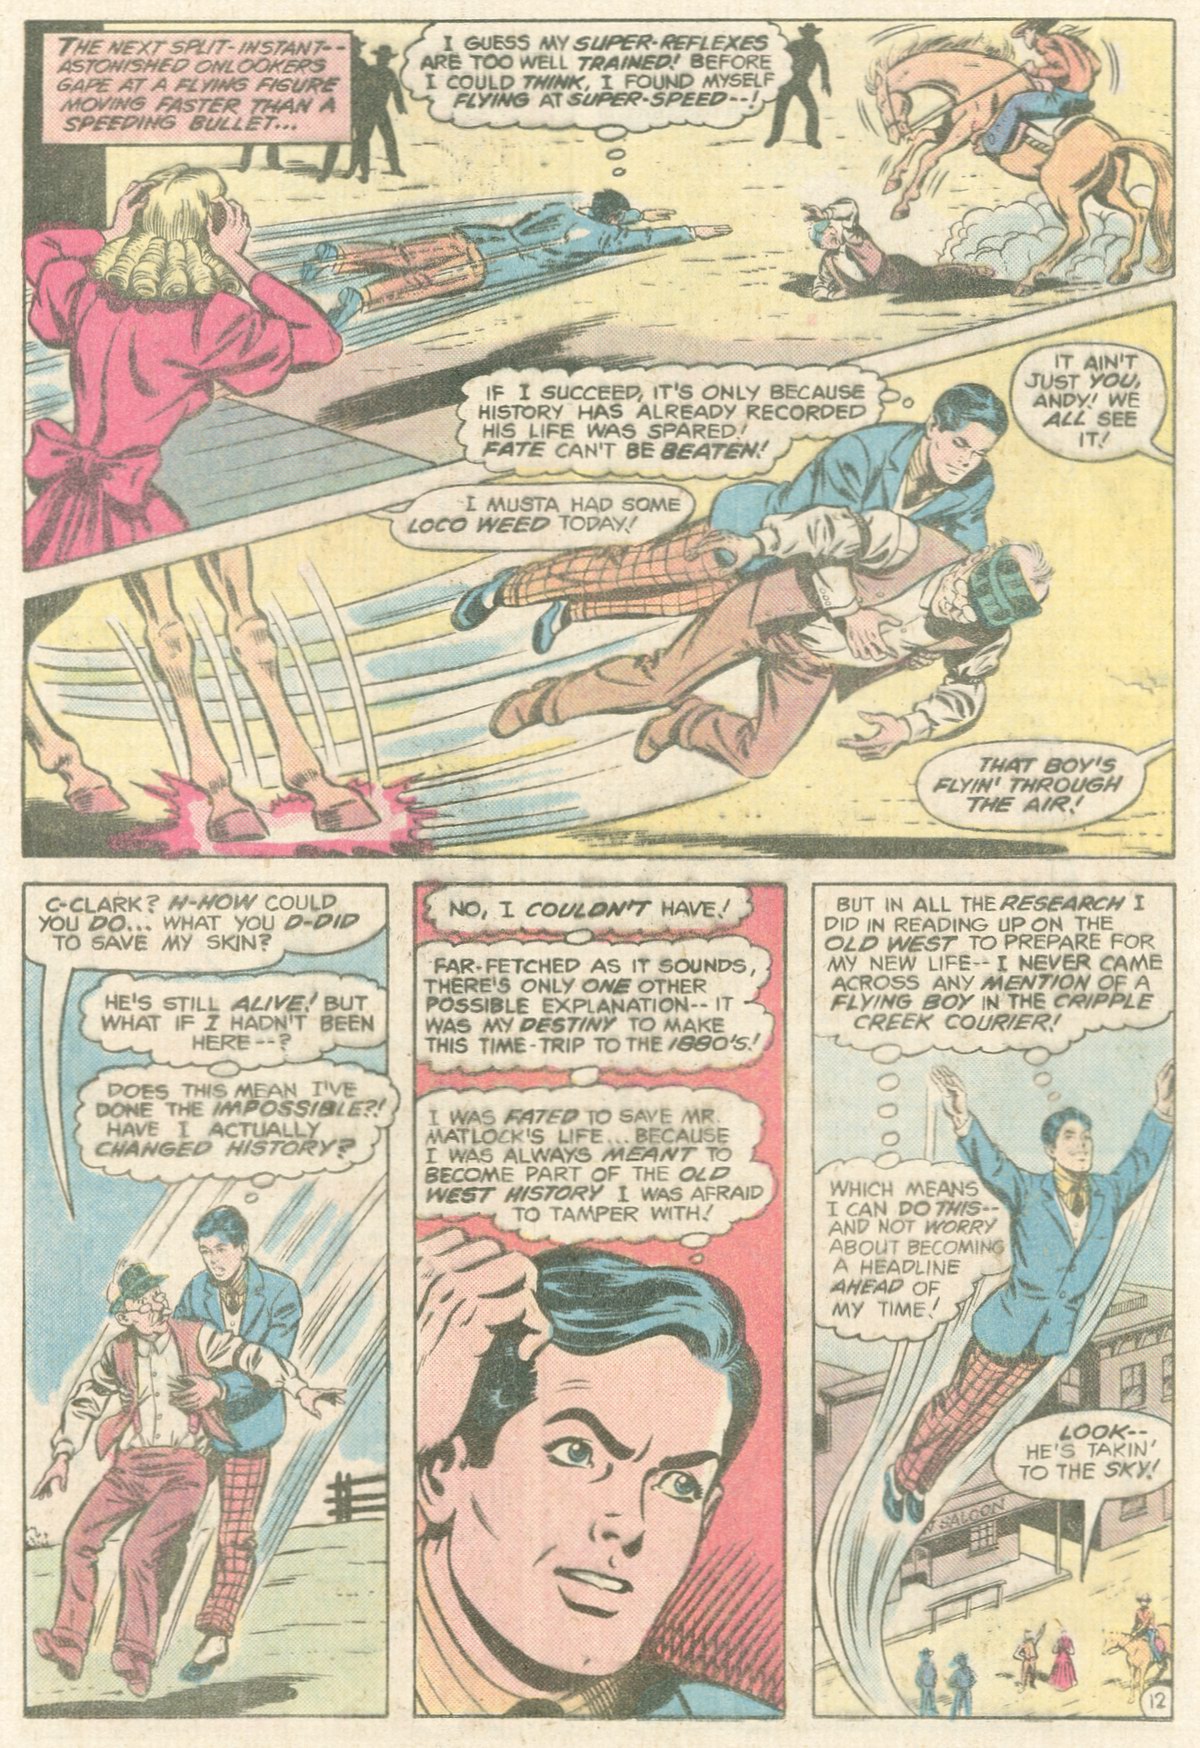 The New Adventures of Superboy 23 Page 12